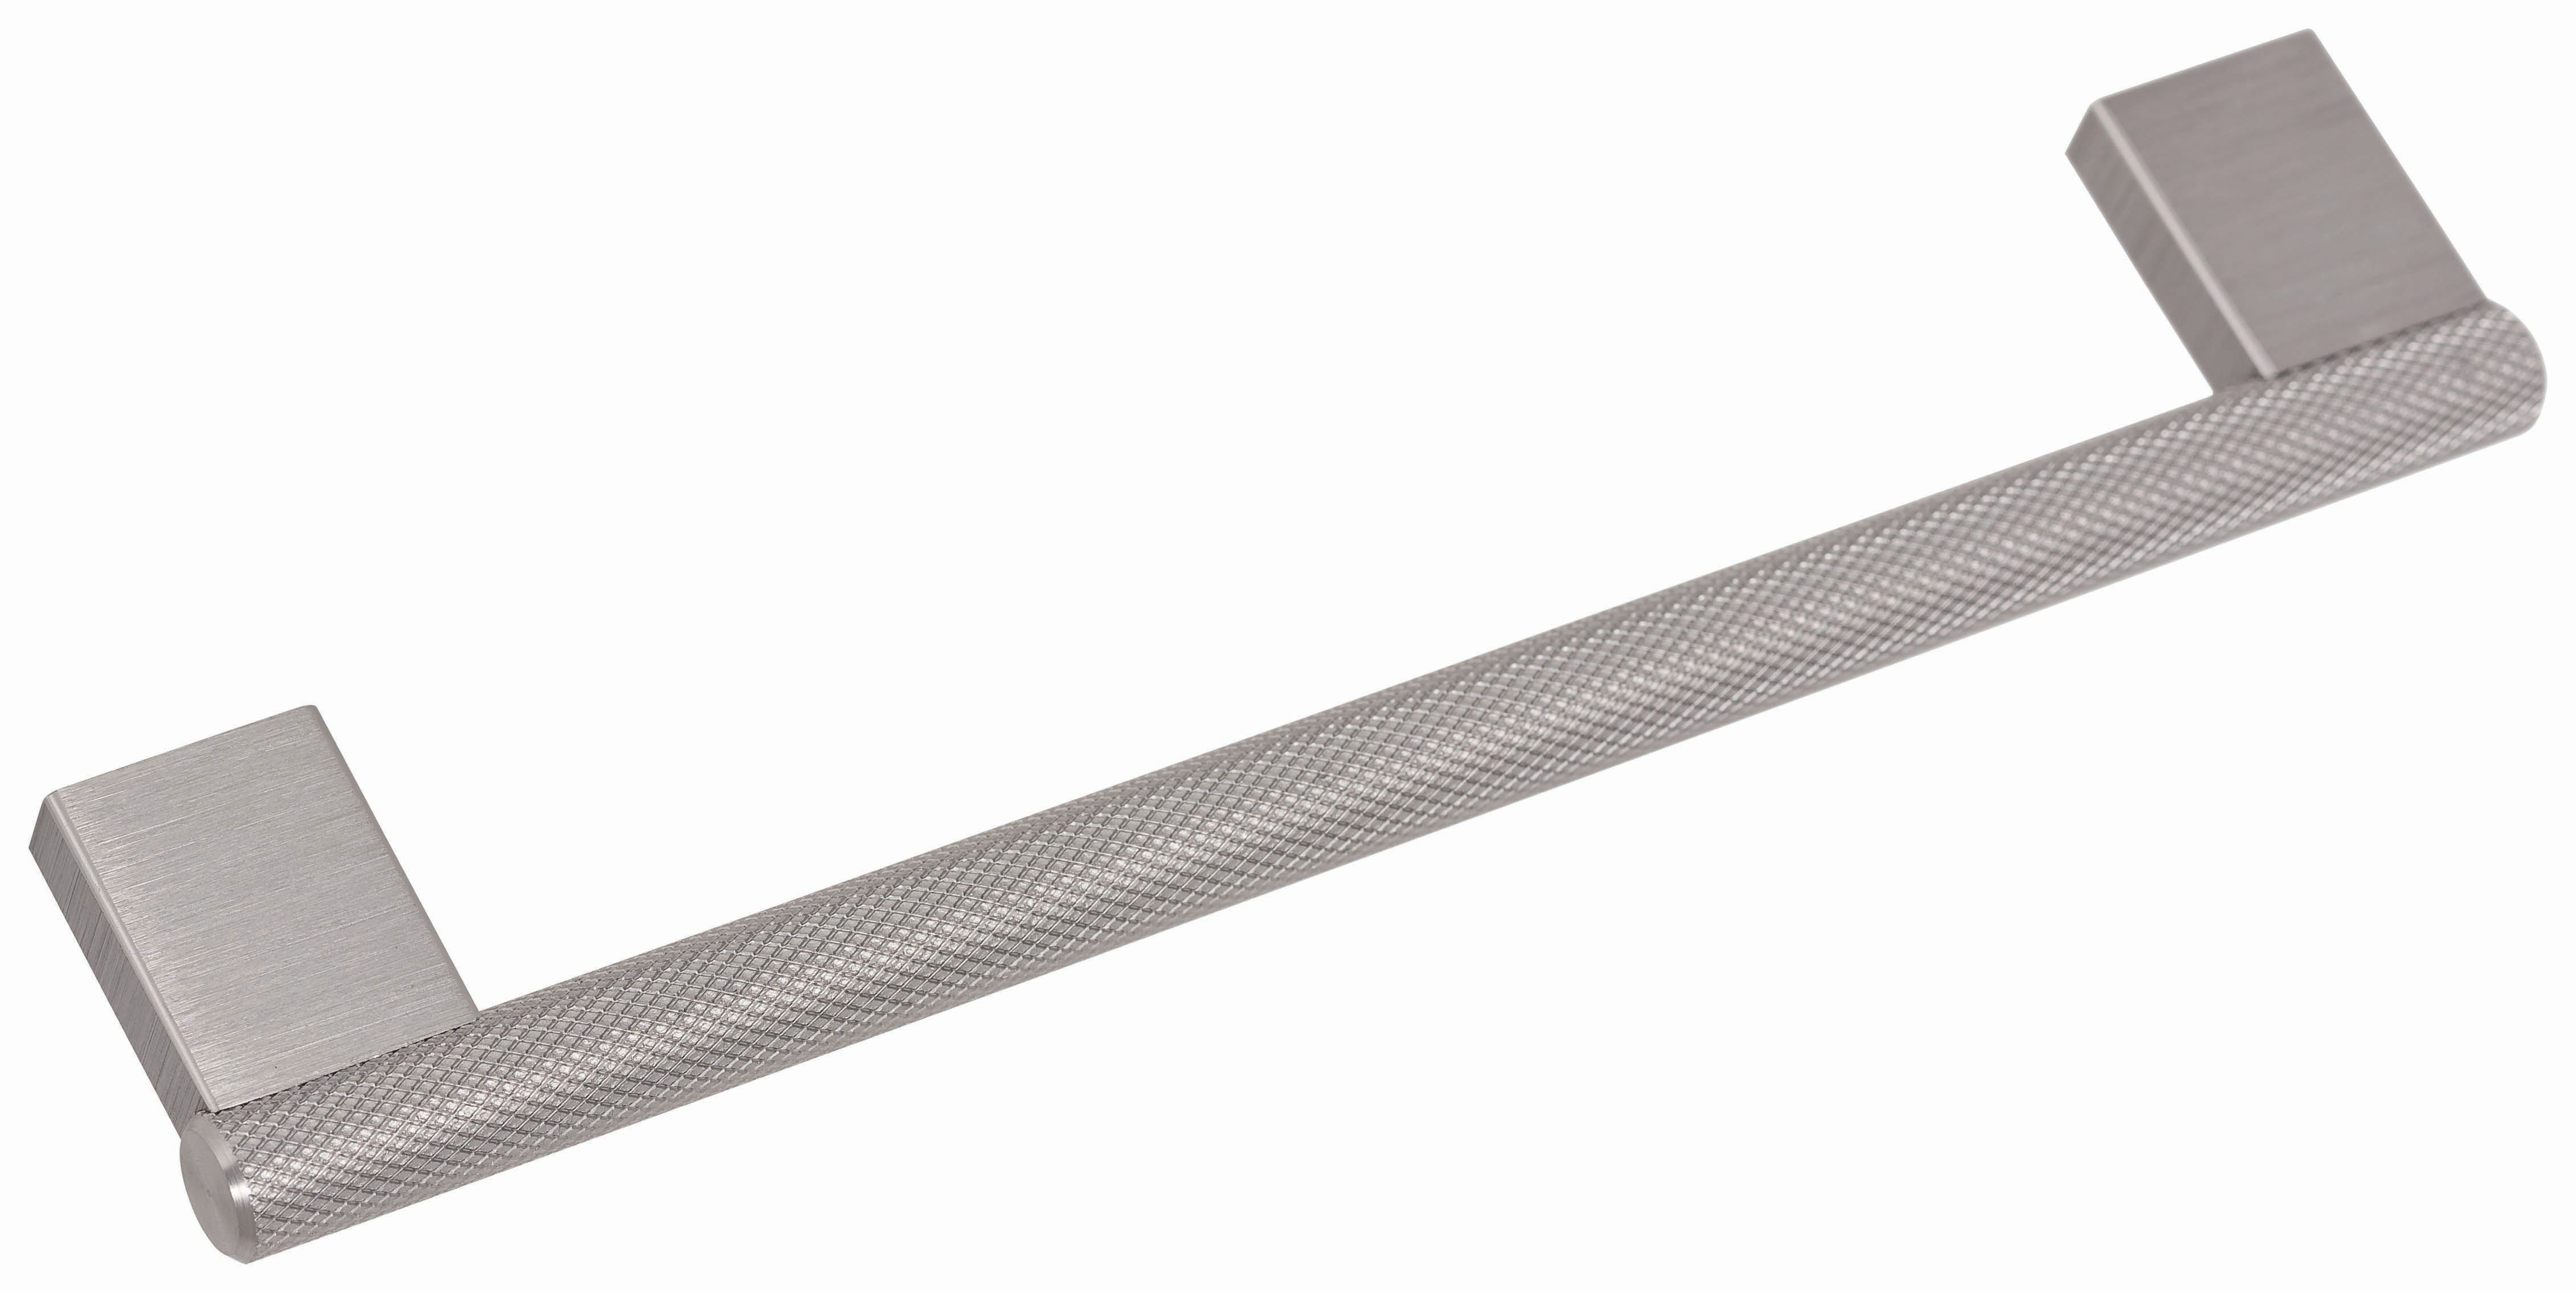 Image of Dalston Textured Bar Handle Brushed Steel 278mm